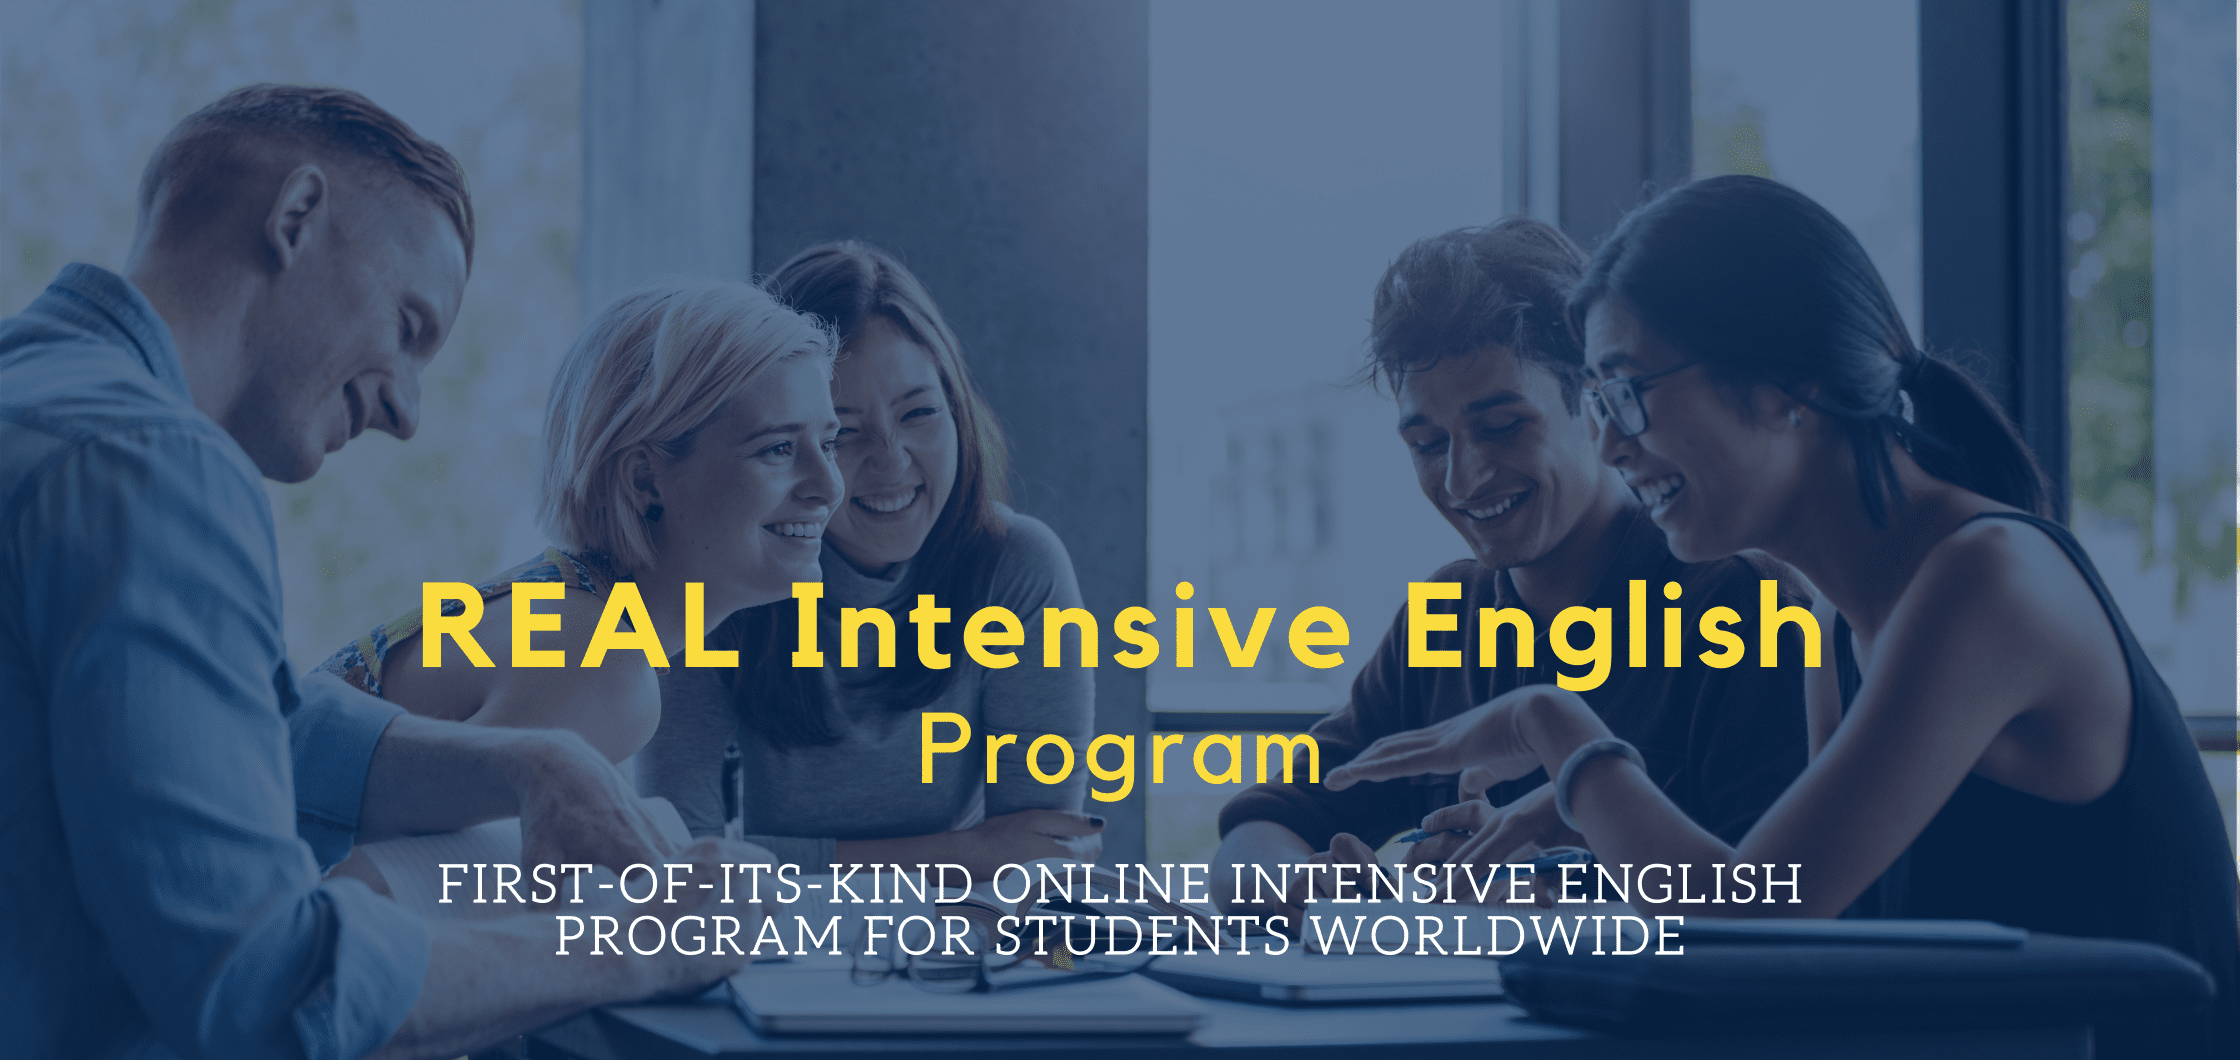 Westcliff University Offers First-of-Its-Kind For-Credit Online Intensive English Program for Students Worldwide